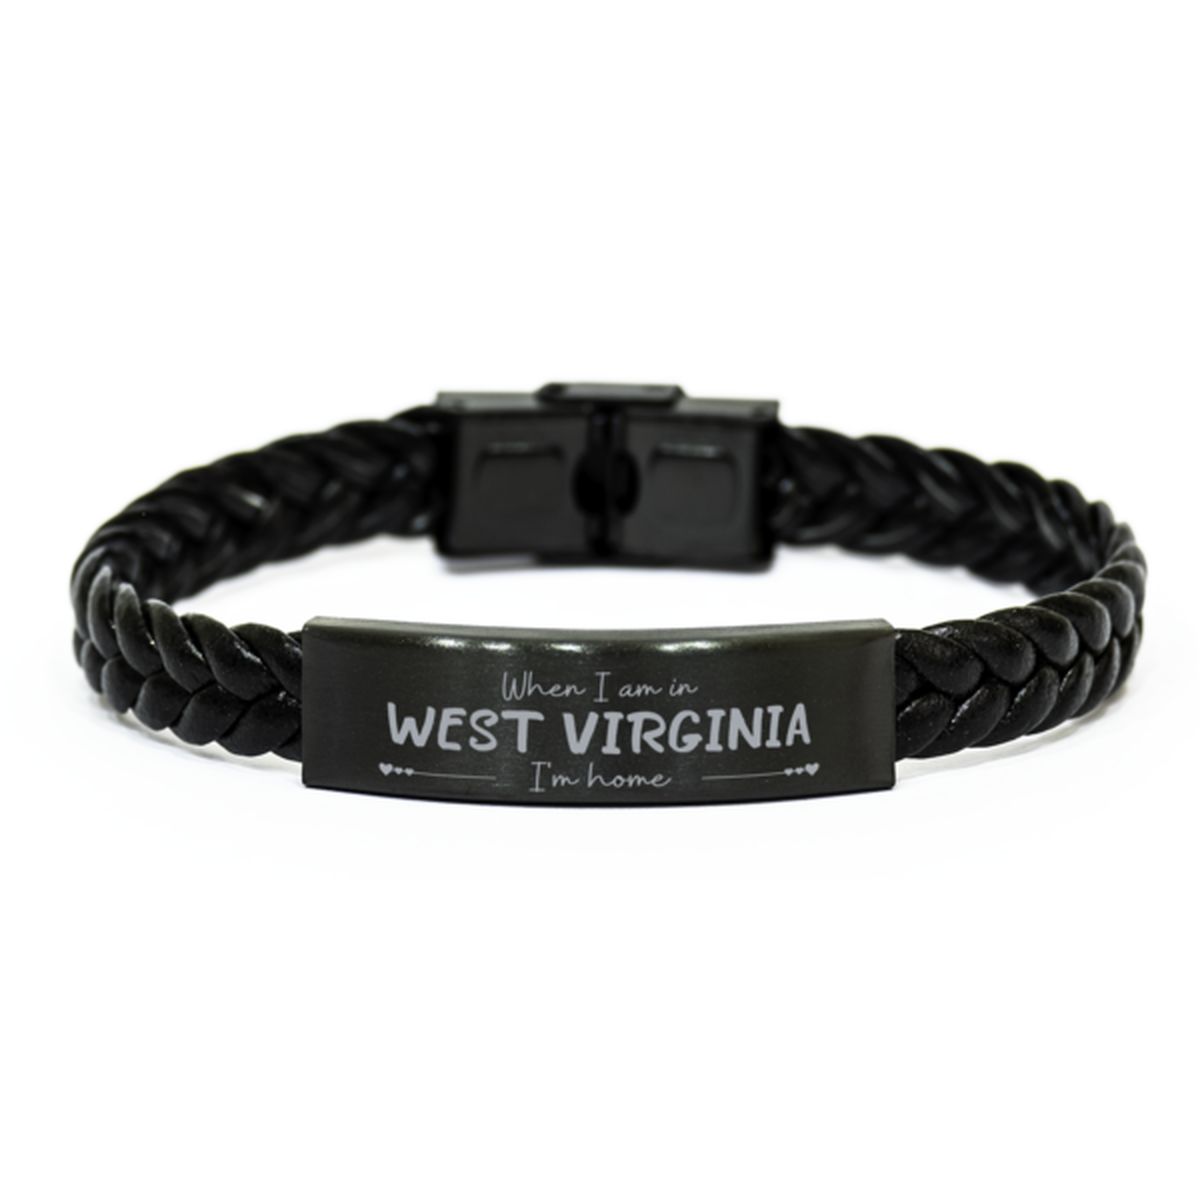 When I am in West Virginia I'm home Braided Leather Bracelet, Cheap Gifts For West Virginia, State West Virginia Birthday Gifts for Friends Coworker